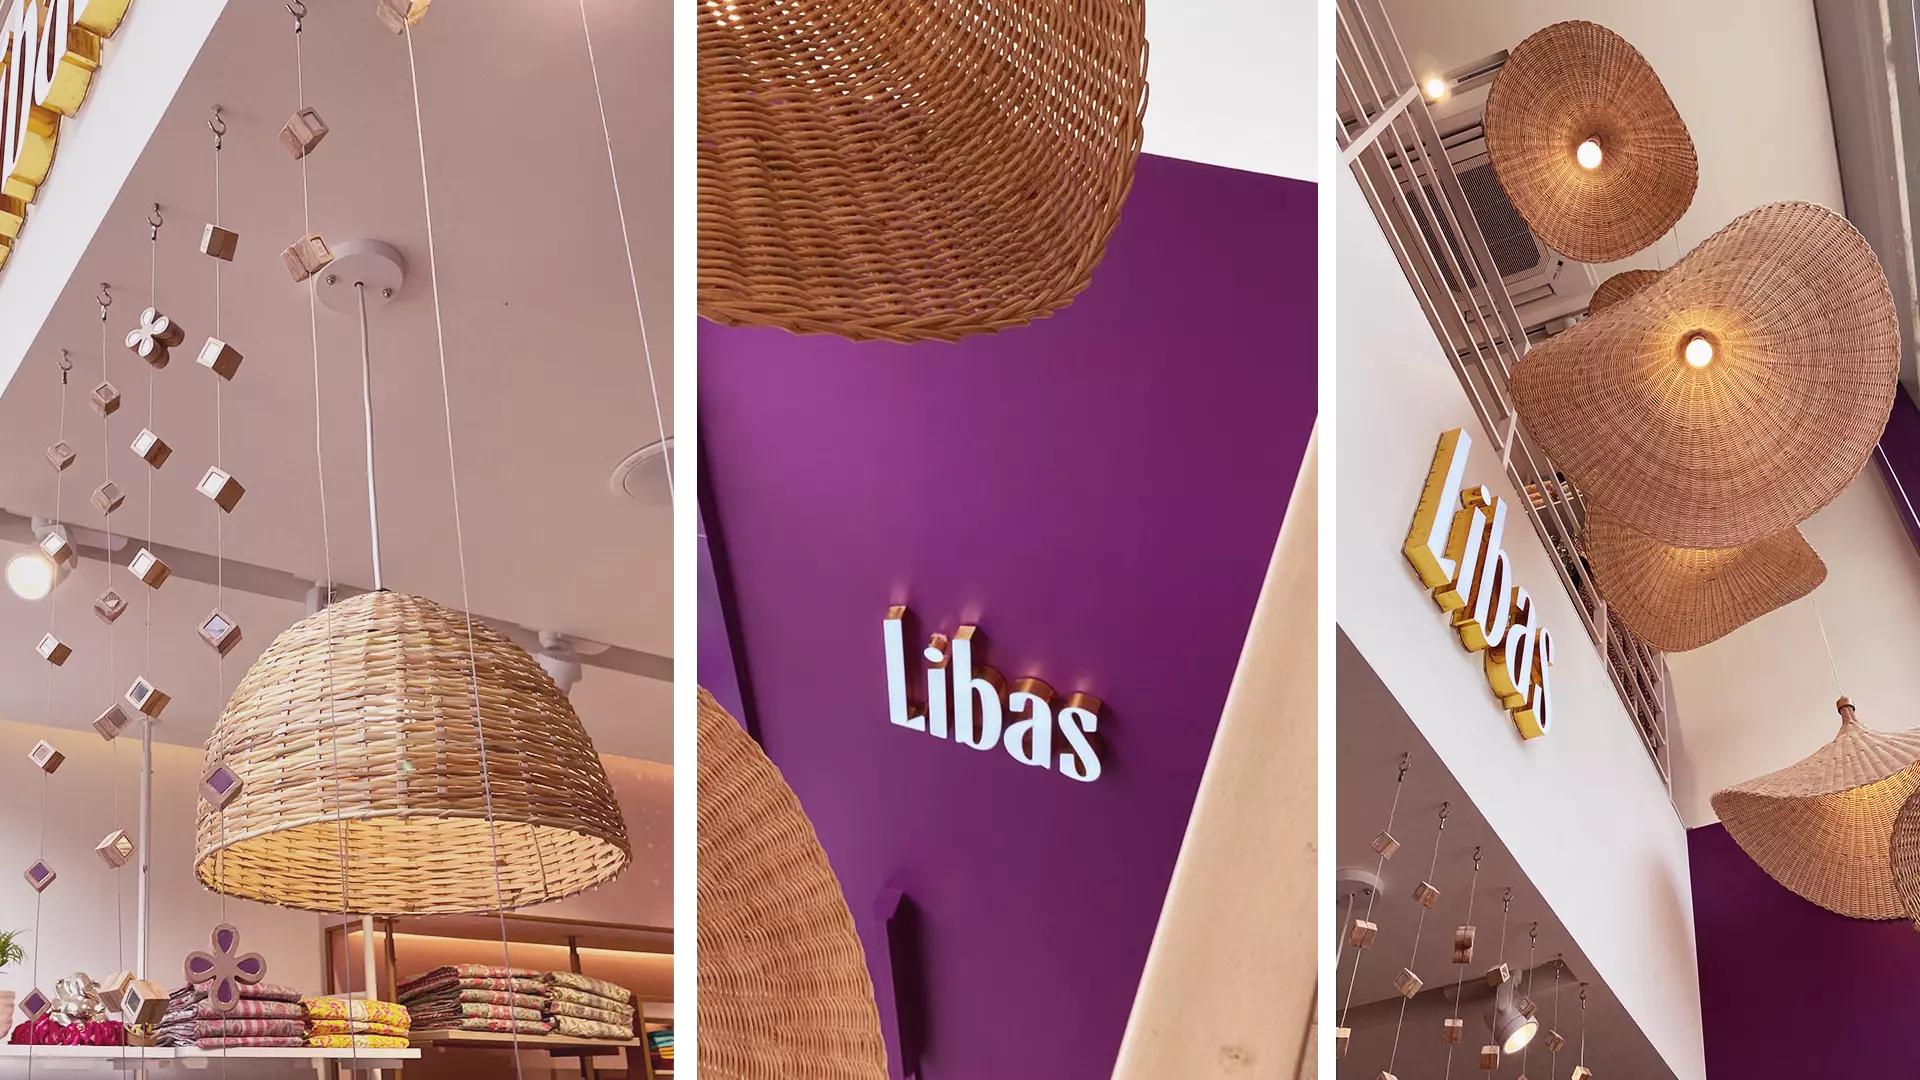 Space design and branding for Libas store by Lopez Design